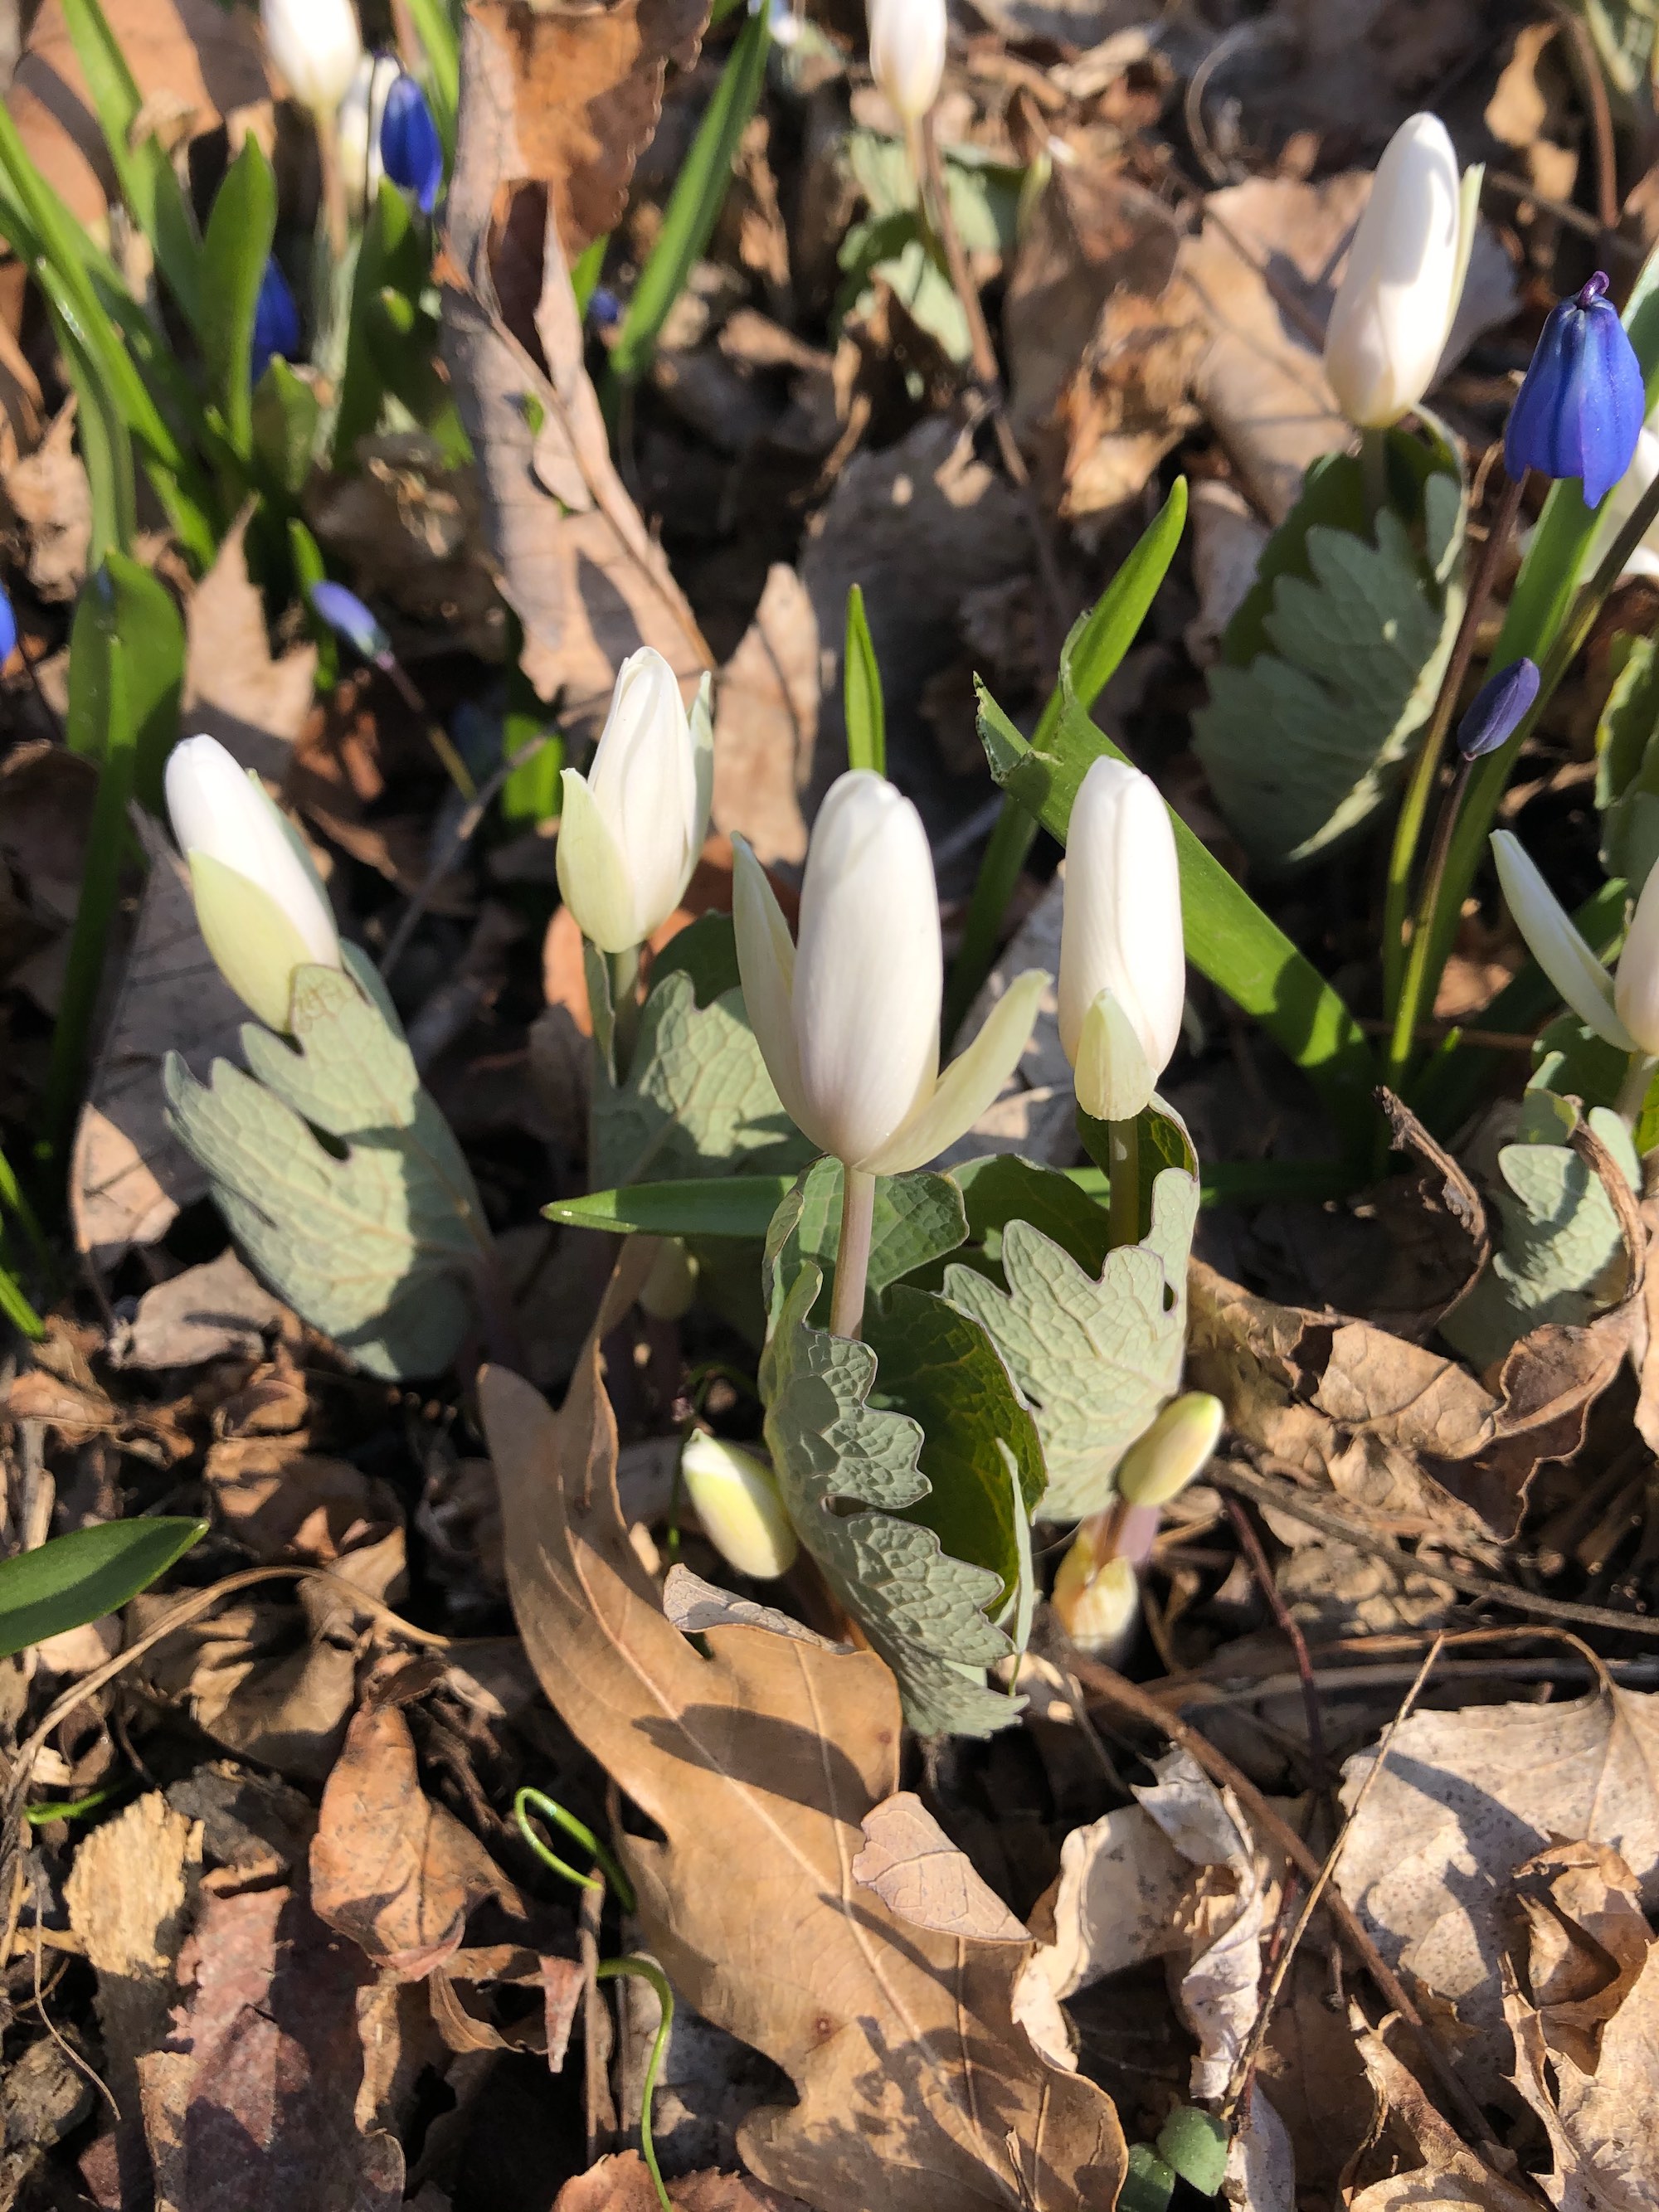 Bloodroot in south-facing yard on Nakoma Road on April 3, 2021.